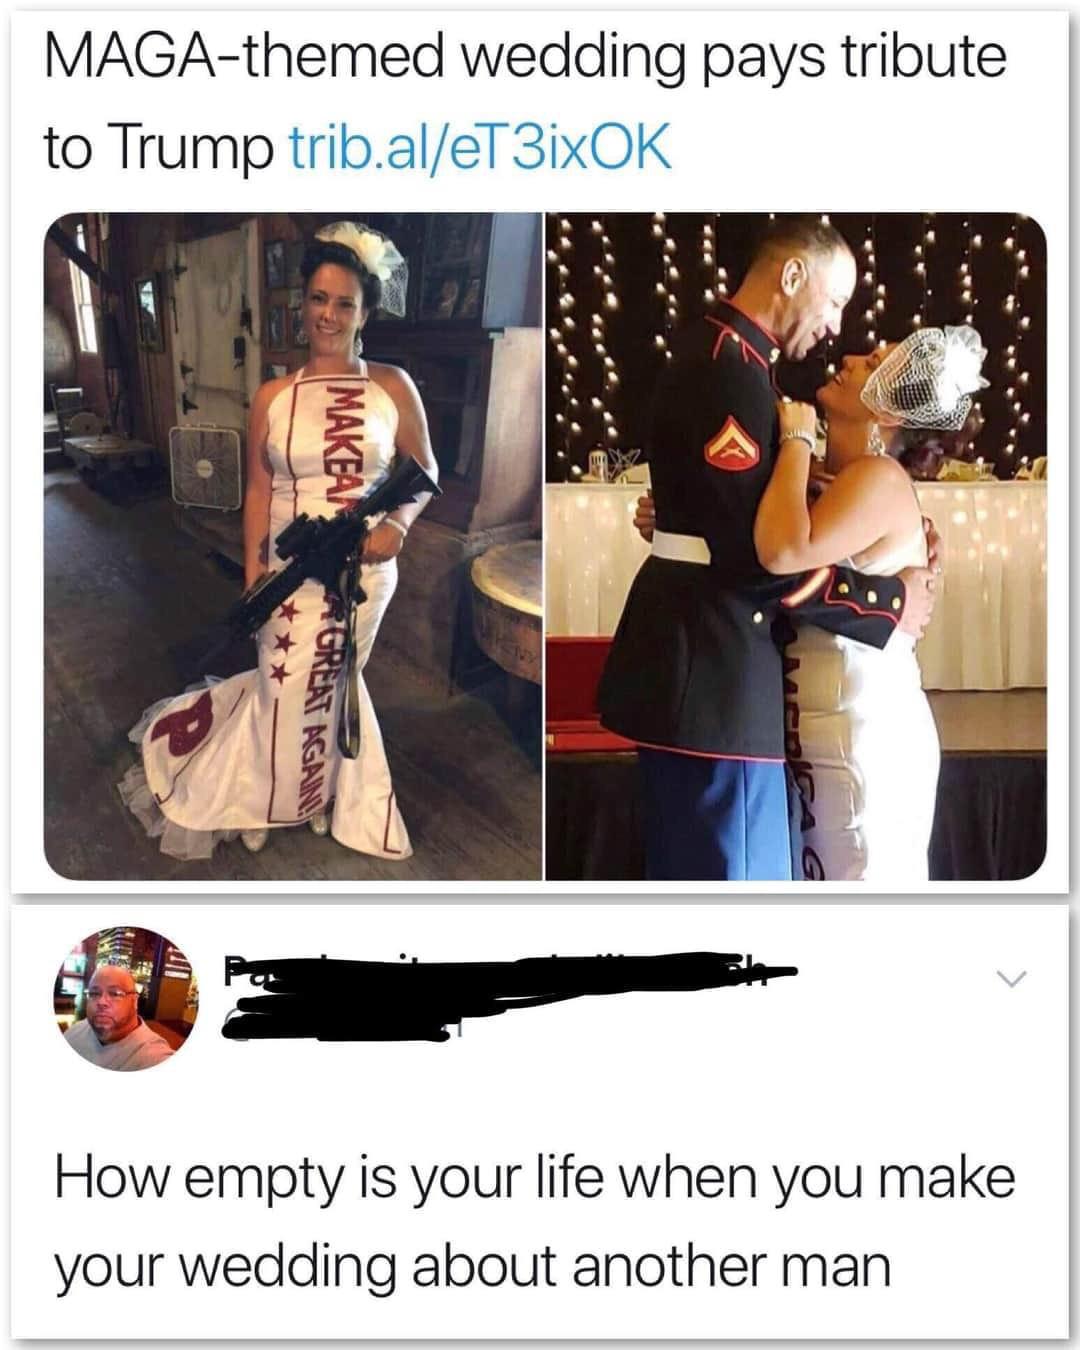 facepalm pics - shoulder - Magathemed wedding pays tribute to Trump trib.aleT3ixOK Makea Great Again How empty is your life when you make your wedding about another man